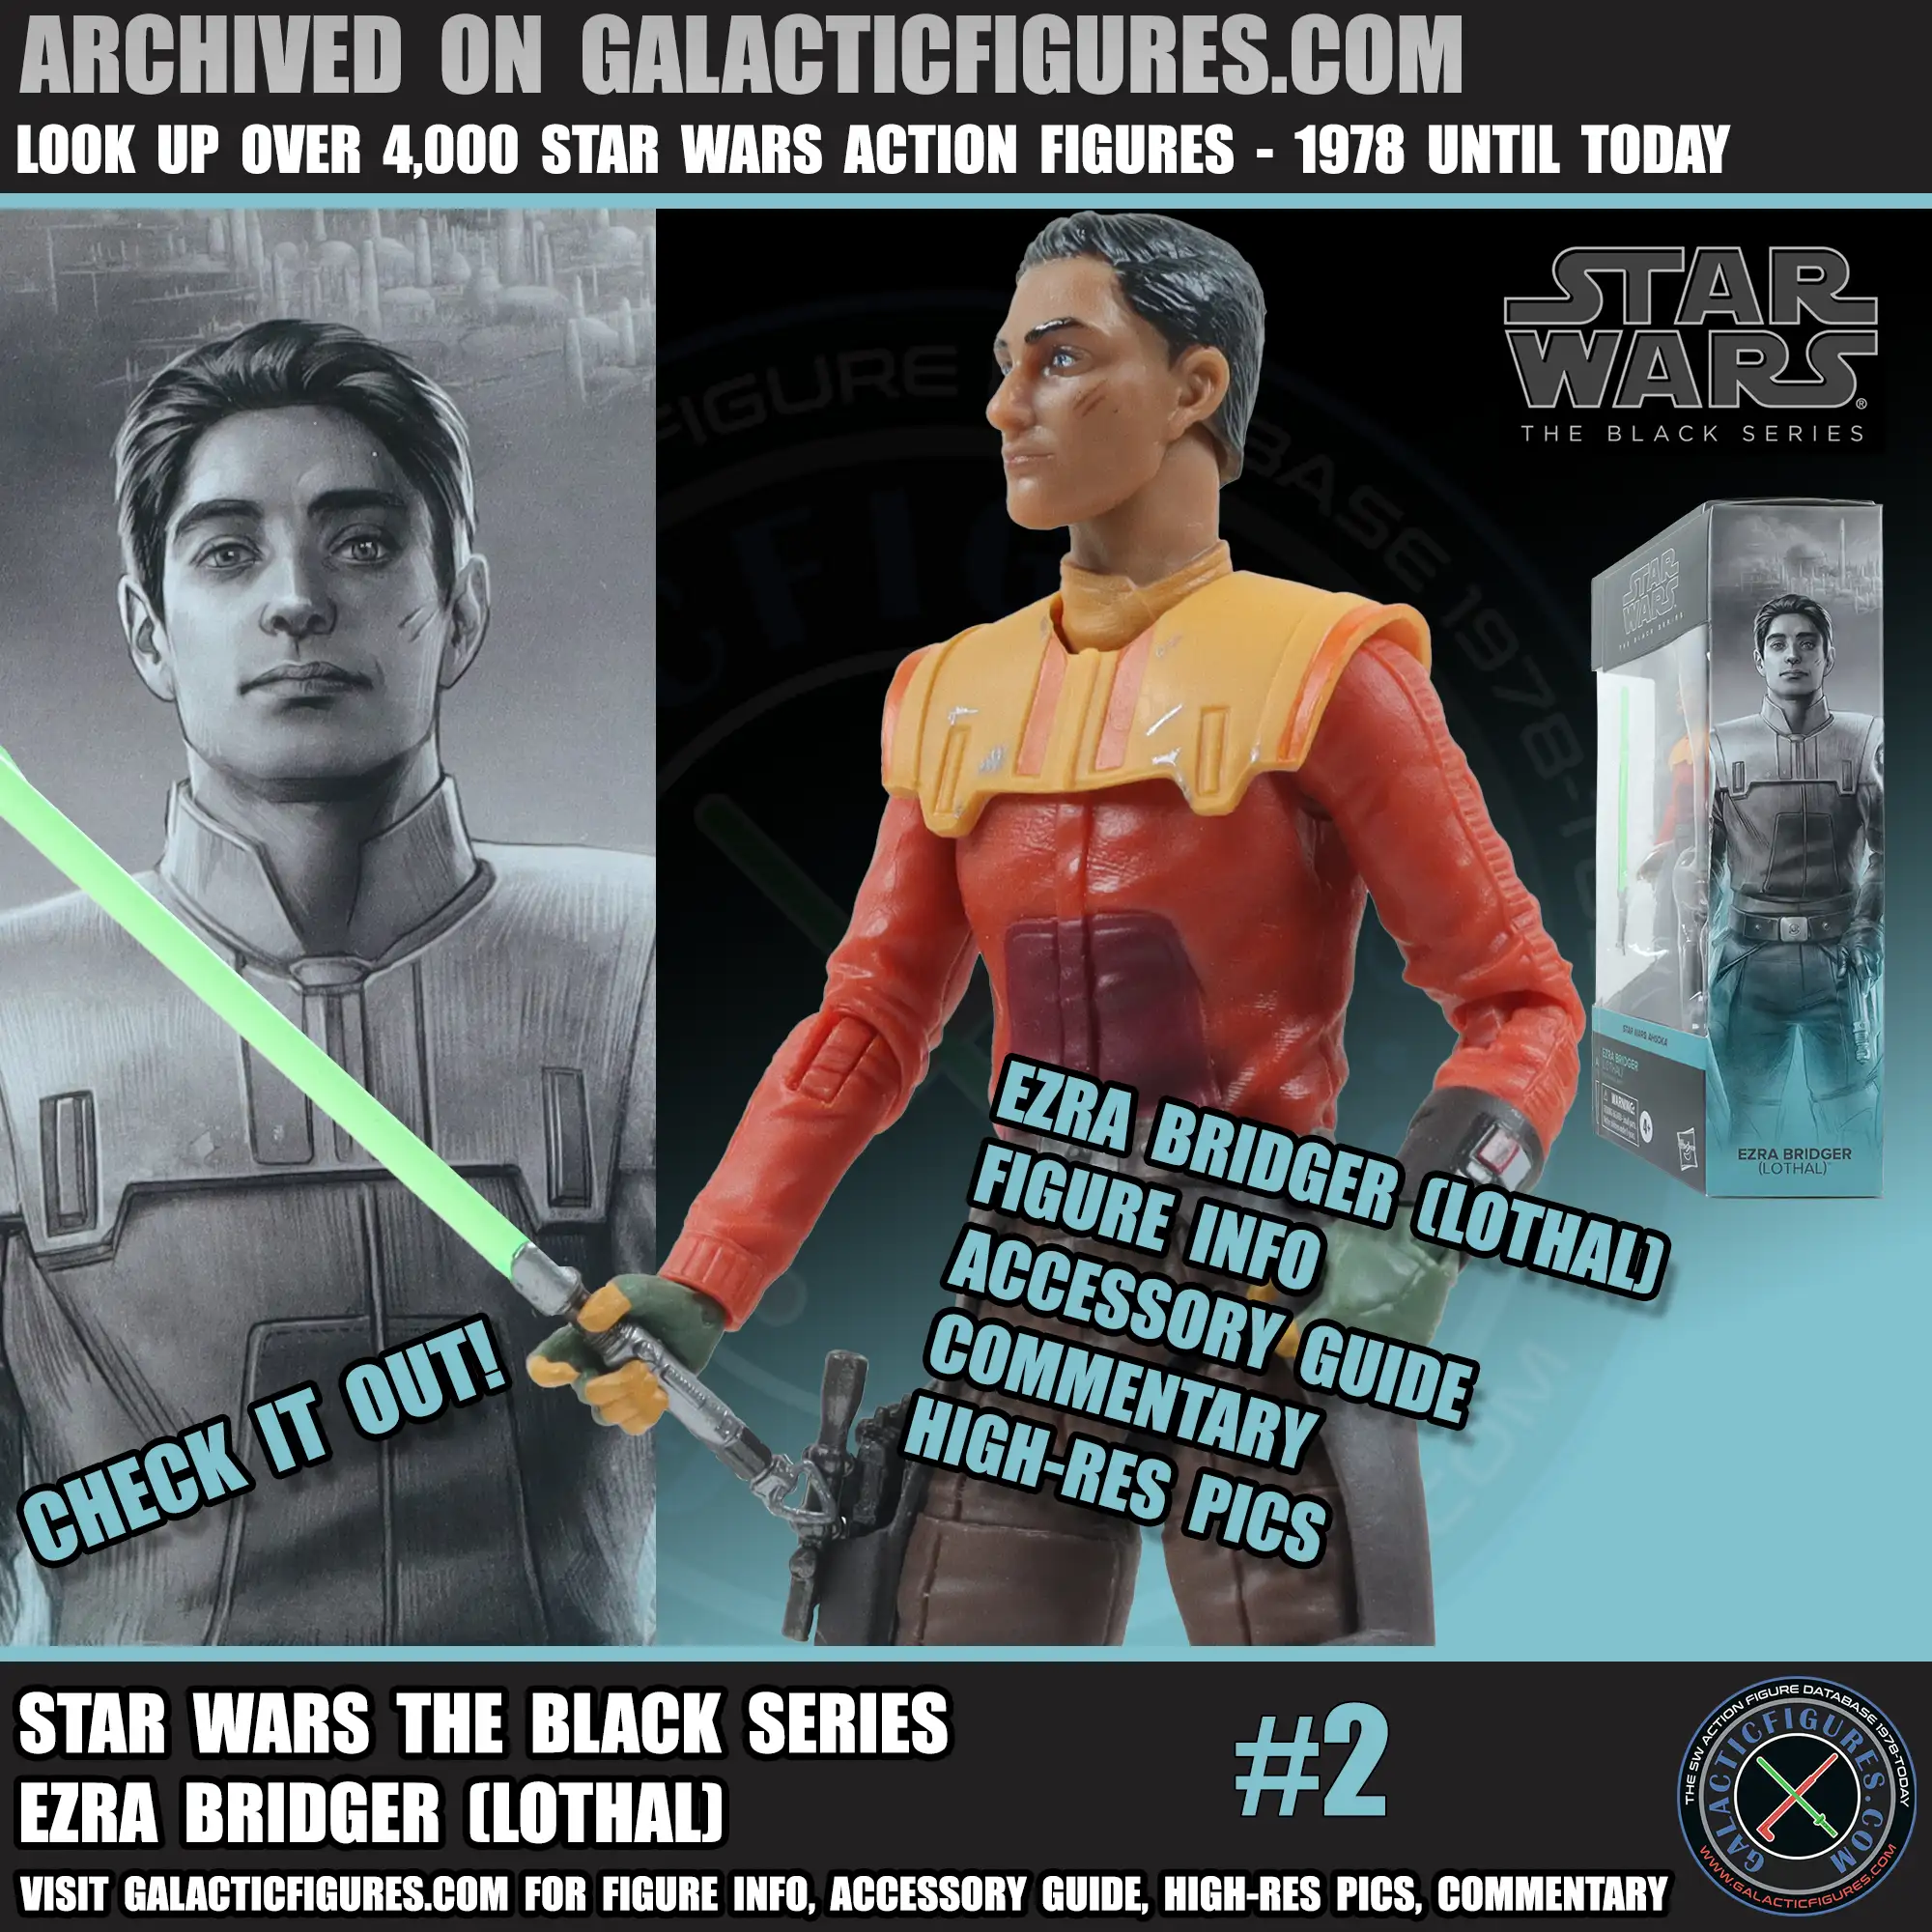 Black Series Ezra Bridger From The Ahsoka TV Show Added - Check It Out!